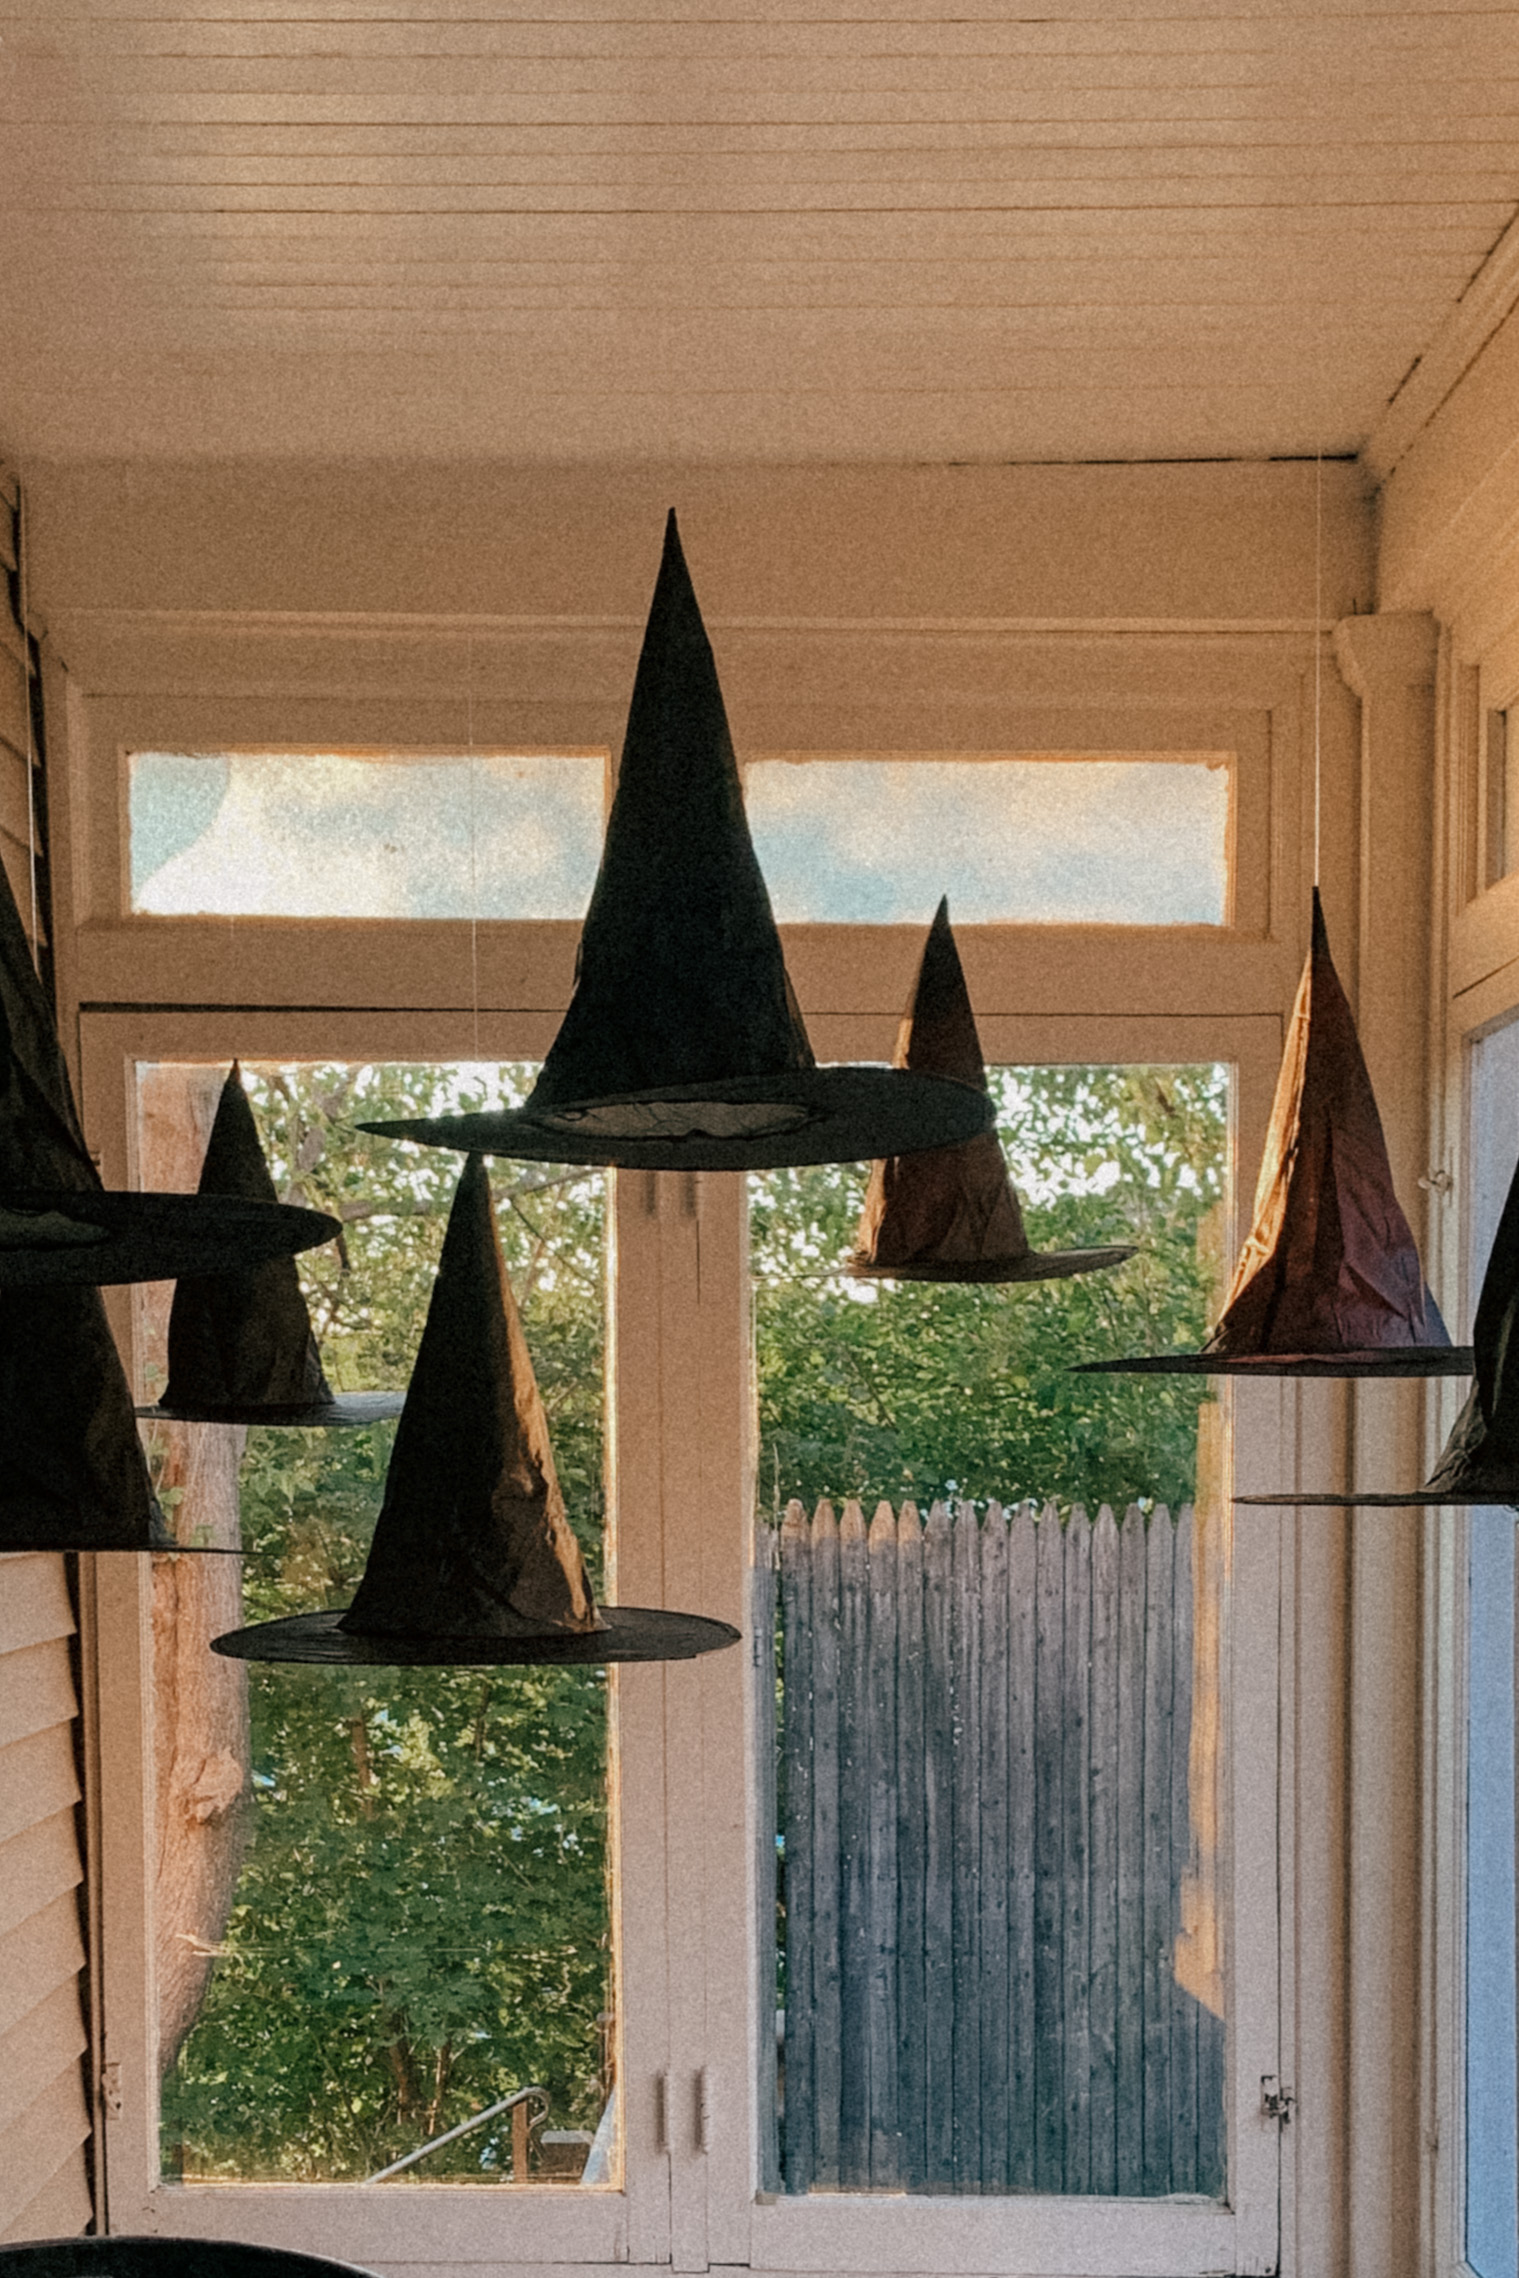 Edgy Neutral Halloween Home Decor Guide | Halloween Decorations | Neutral Halloween Decorations | Halloween Home Décor | The Best Neutral Halloween Home Decor | Spooky Chic Halloween Decorations | Grandin Road Halloween Decor | Bat Wall Decals for Halloween | Easy Halloween Decor | DIY Halloween Decorations | Floating Witch Hats 